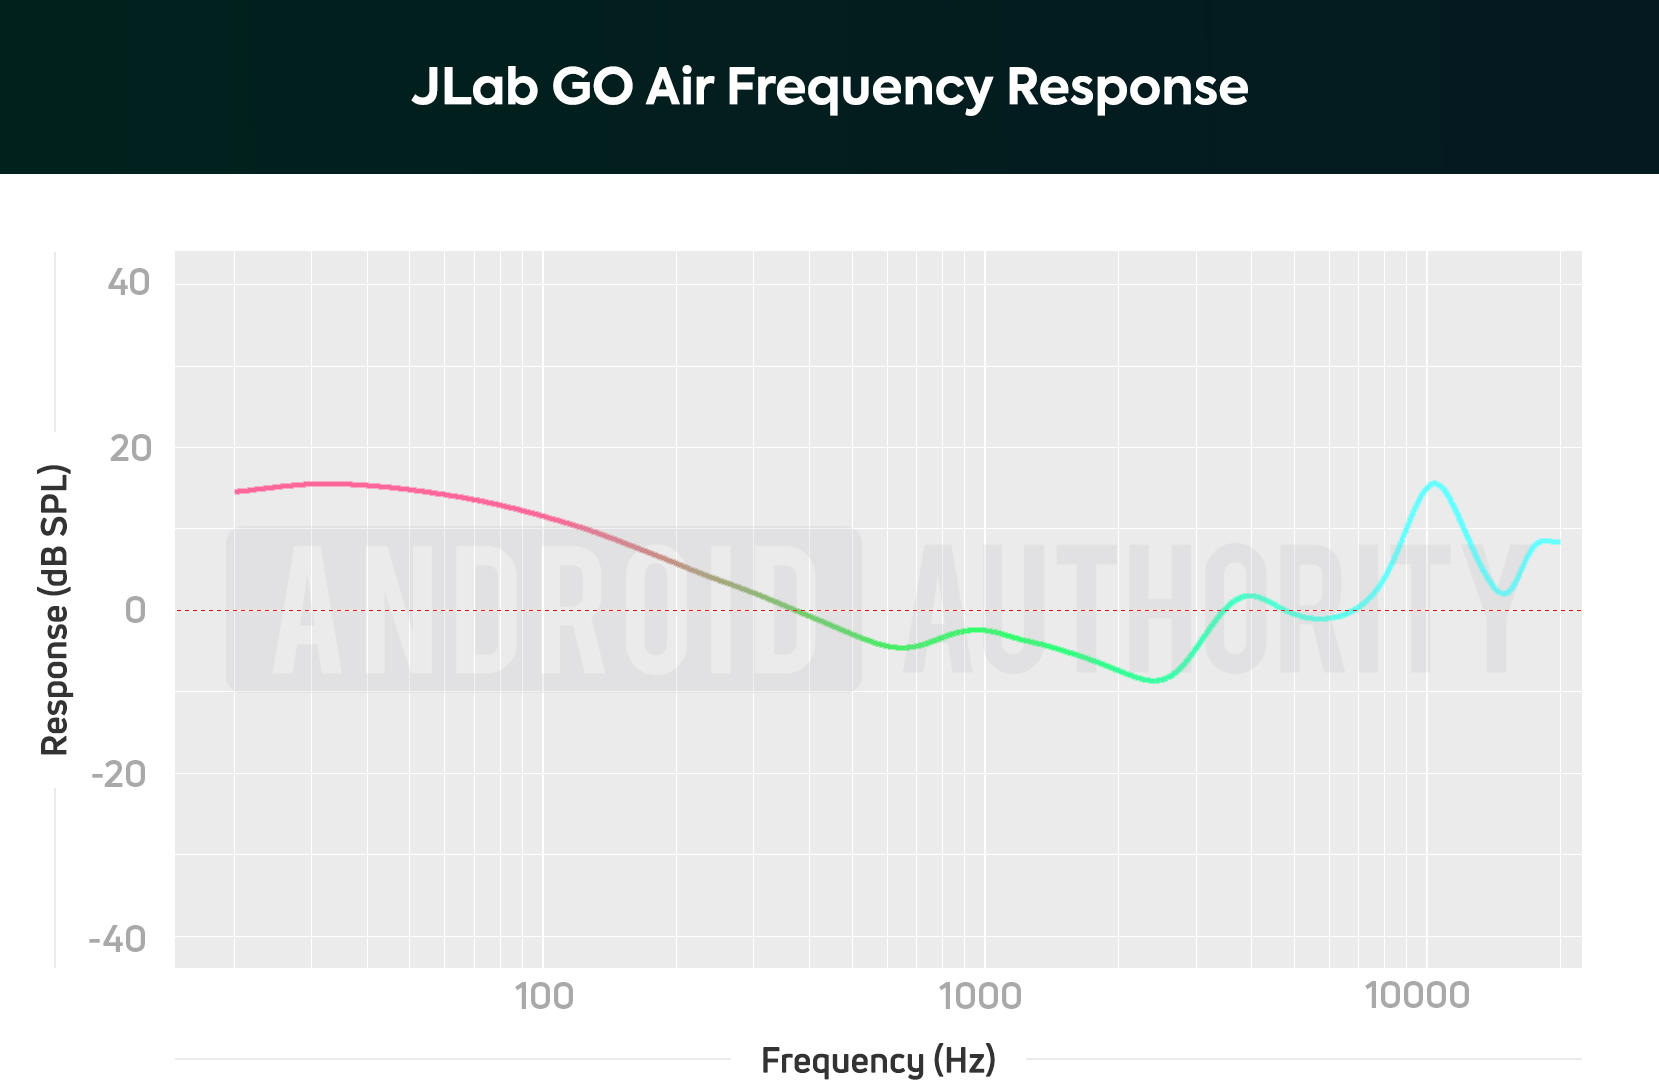 A chart depicting the JLab GO Air true wireless earbuds frequency response that heavily amplifies sub-bass and bass notes, making it difficult to perceive vocals and harmonic detail.